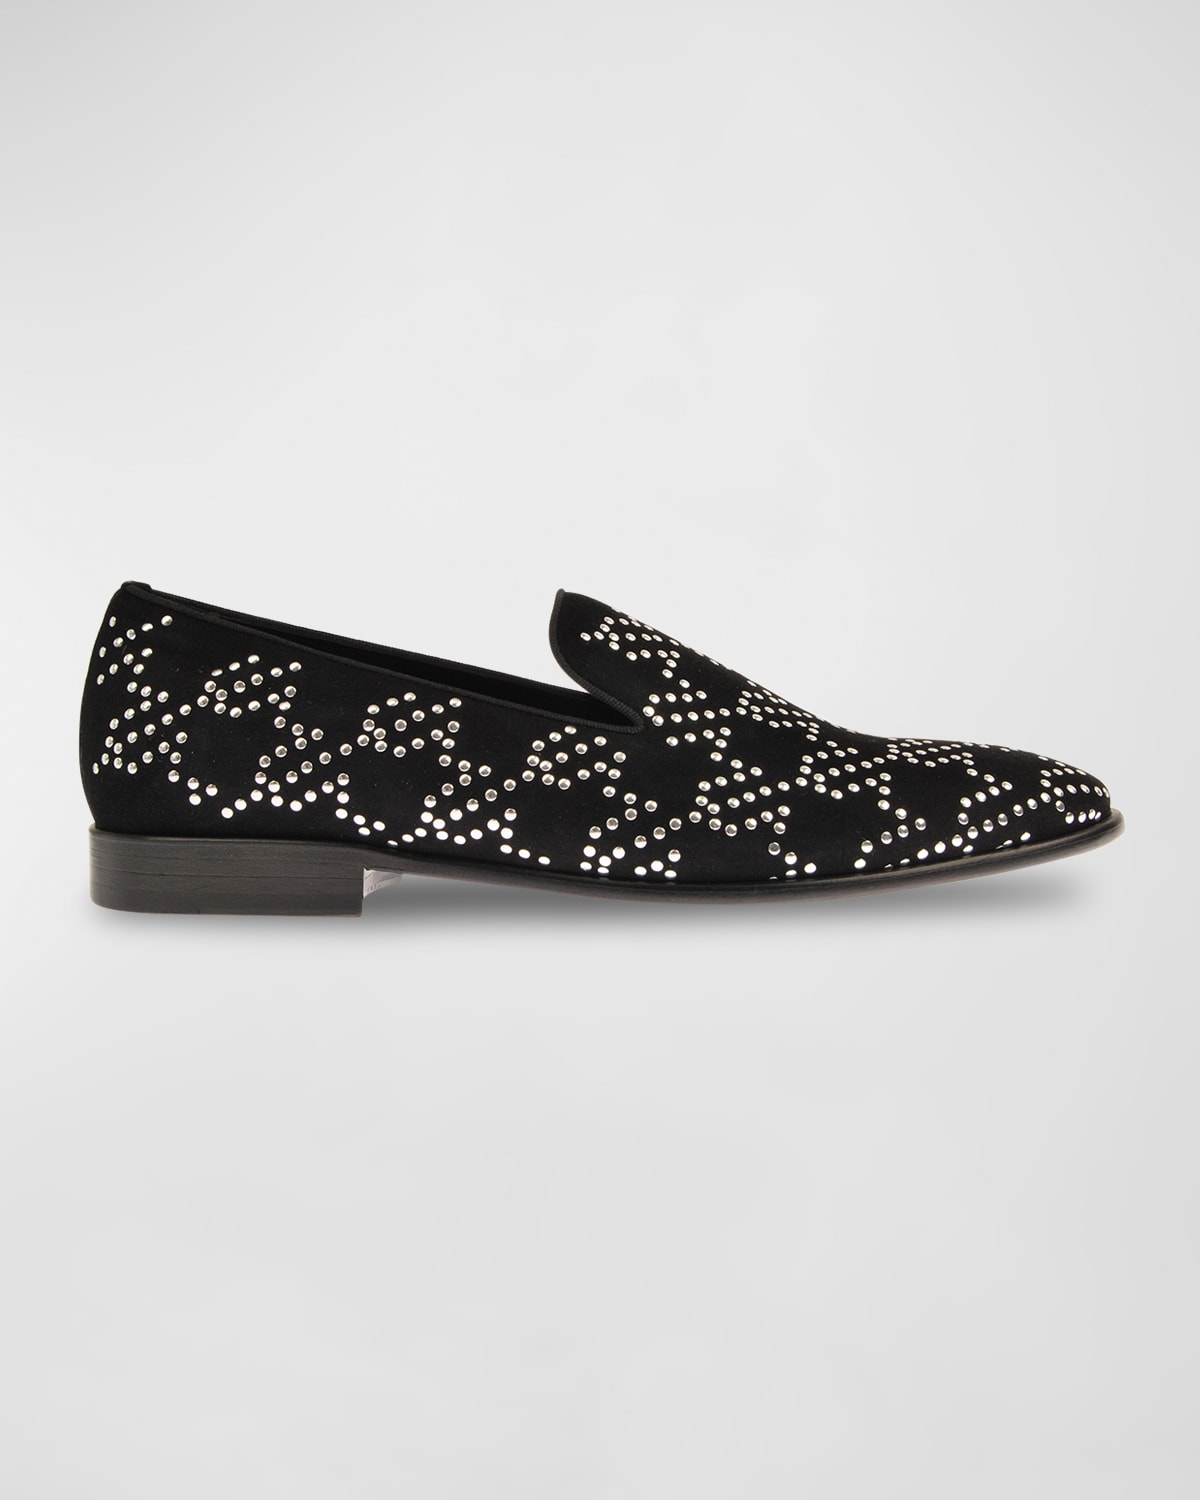 Les Hommes Men's Studded Suede Smoking Slippers In Black